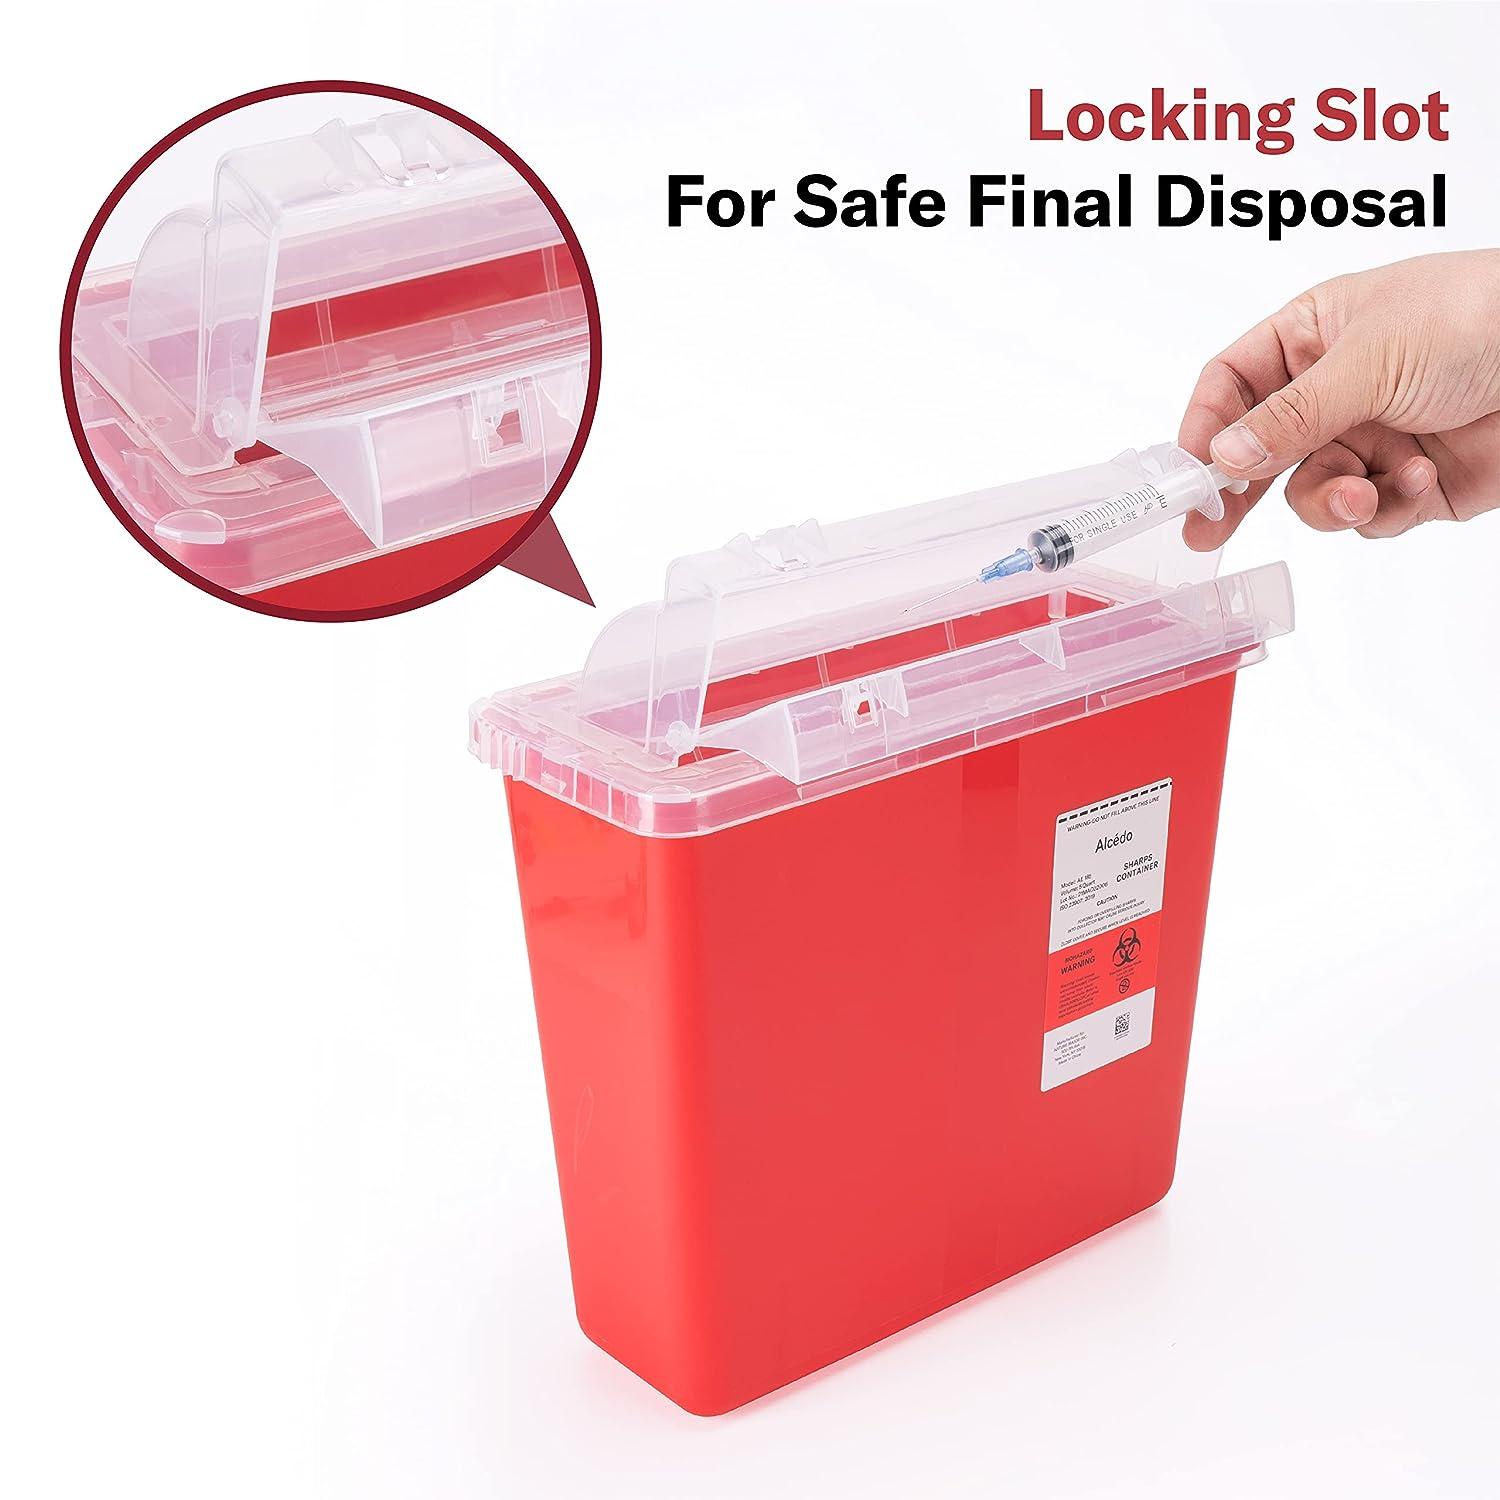 Alcedo Sharps Container for Home and Professional Use 2 Quart (3-Pack), Biohazard Needle and Syringe Disposal, Medical Grade